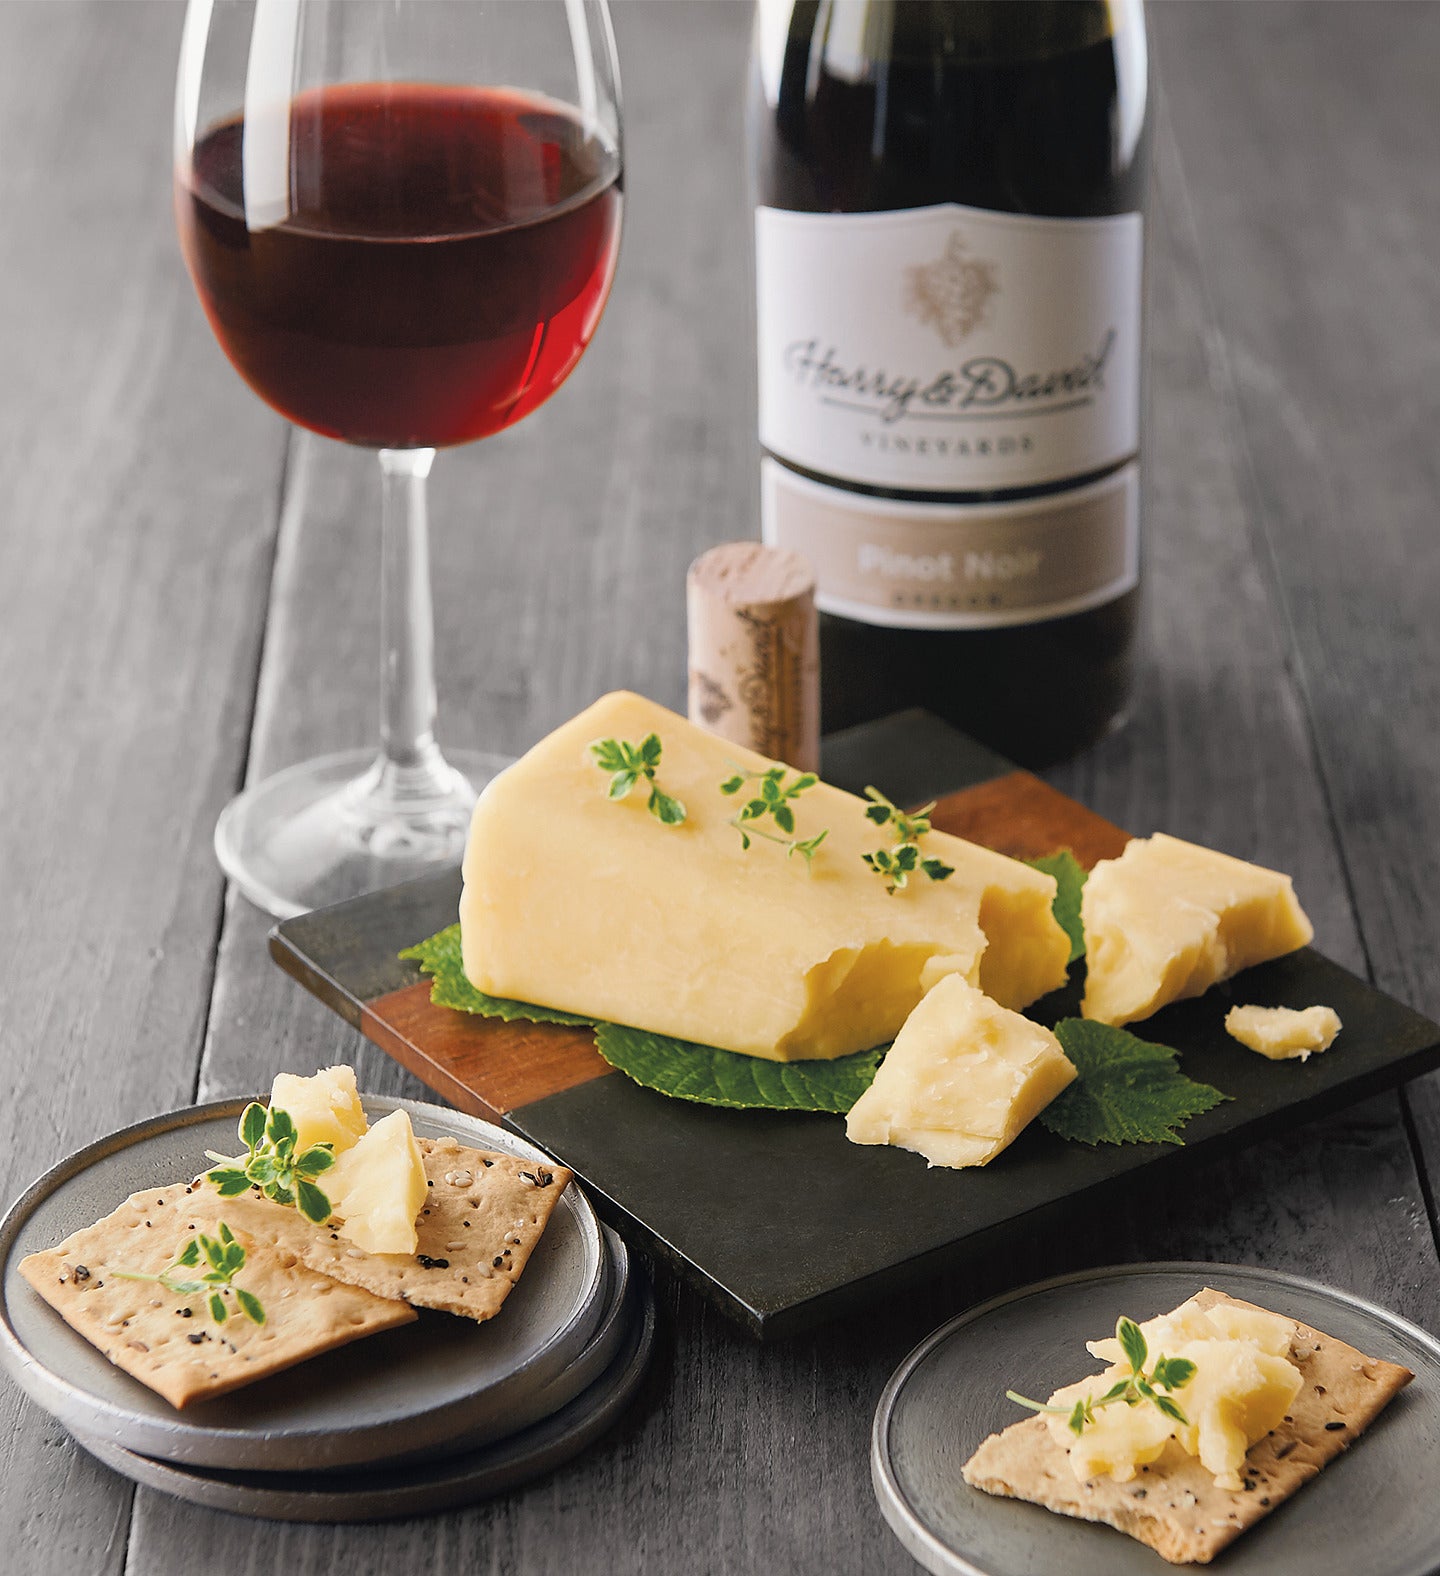 Beehive Cheese Co. Promontory Cheese and Harry & David&trade; Pinot Noir